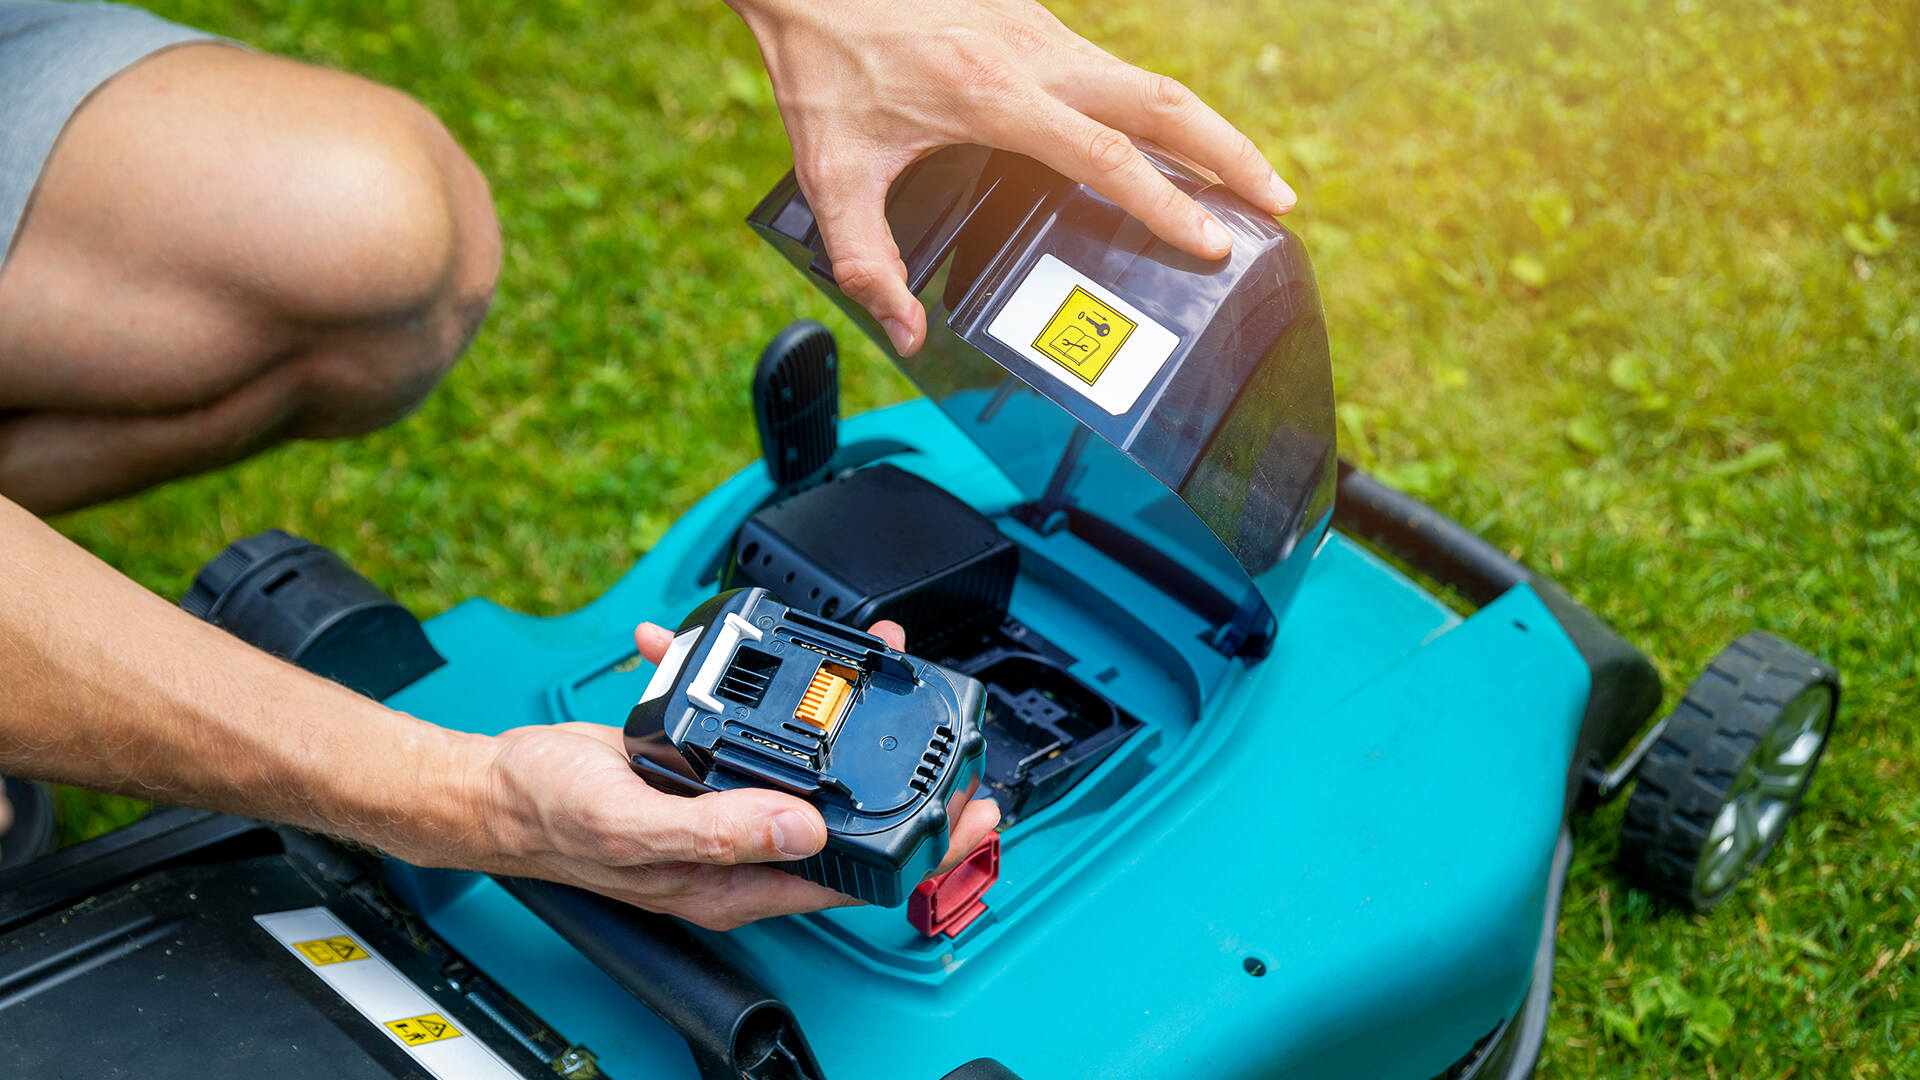 How To Store Lawn Mower Battery For Winter